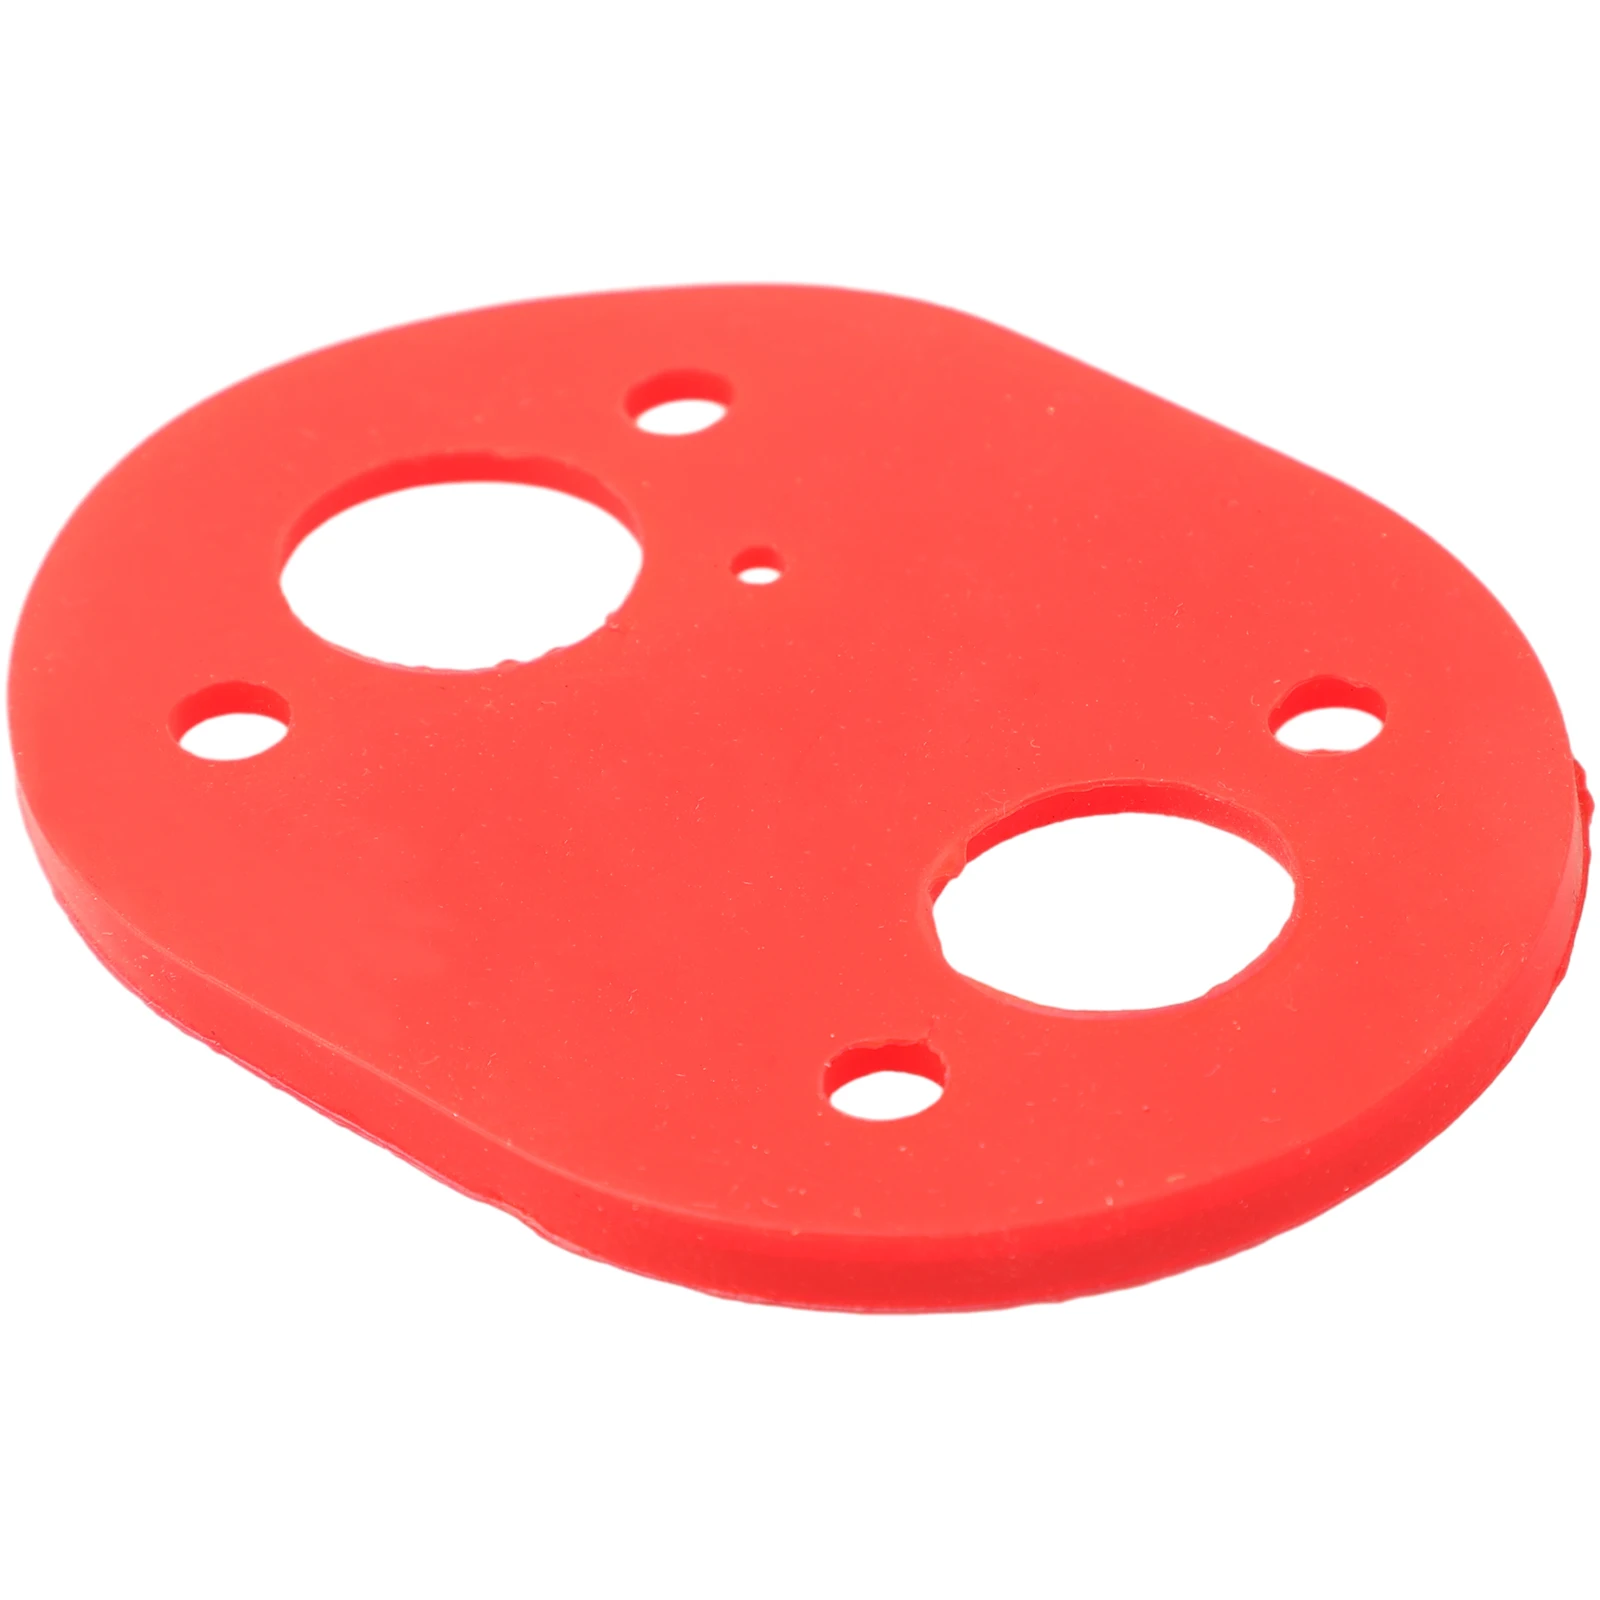 

Durable High Quality Car Sealing Gasket For Diesel Heater Red 10.9 Cm Interior Accessories Rubber Sealing Gasket